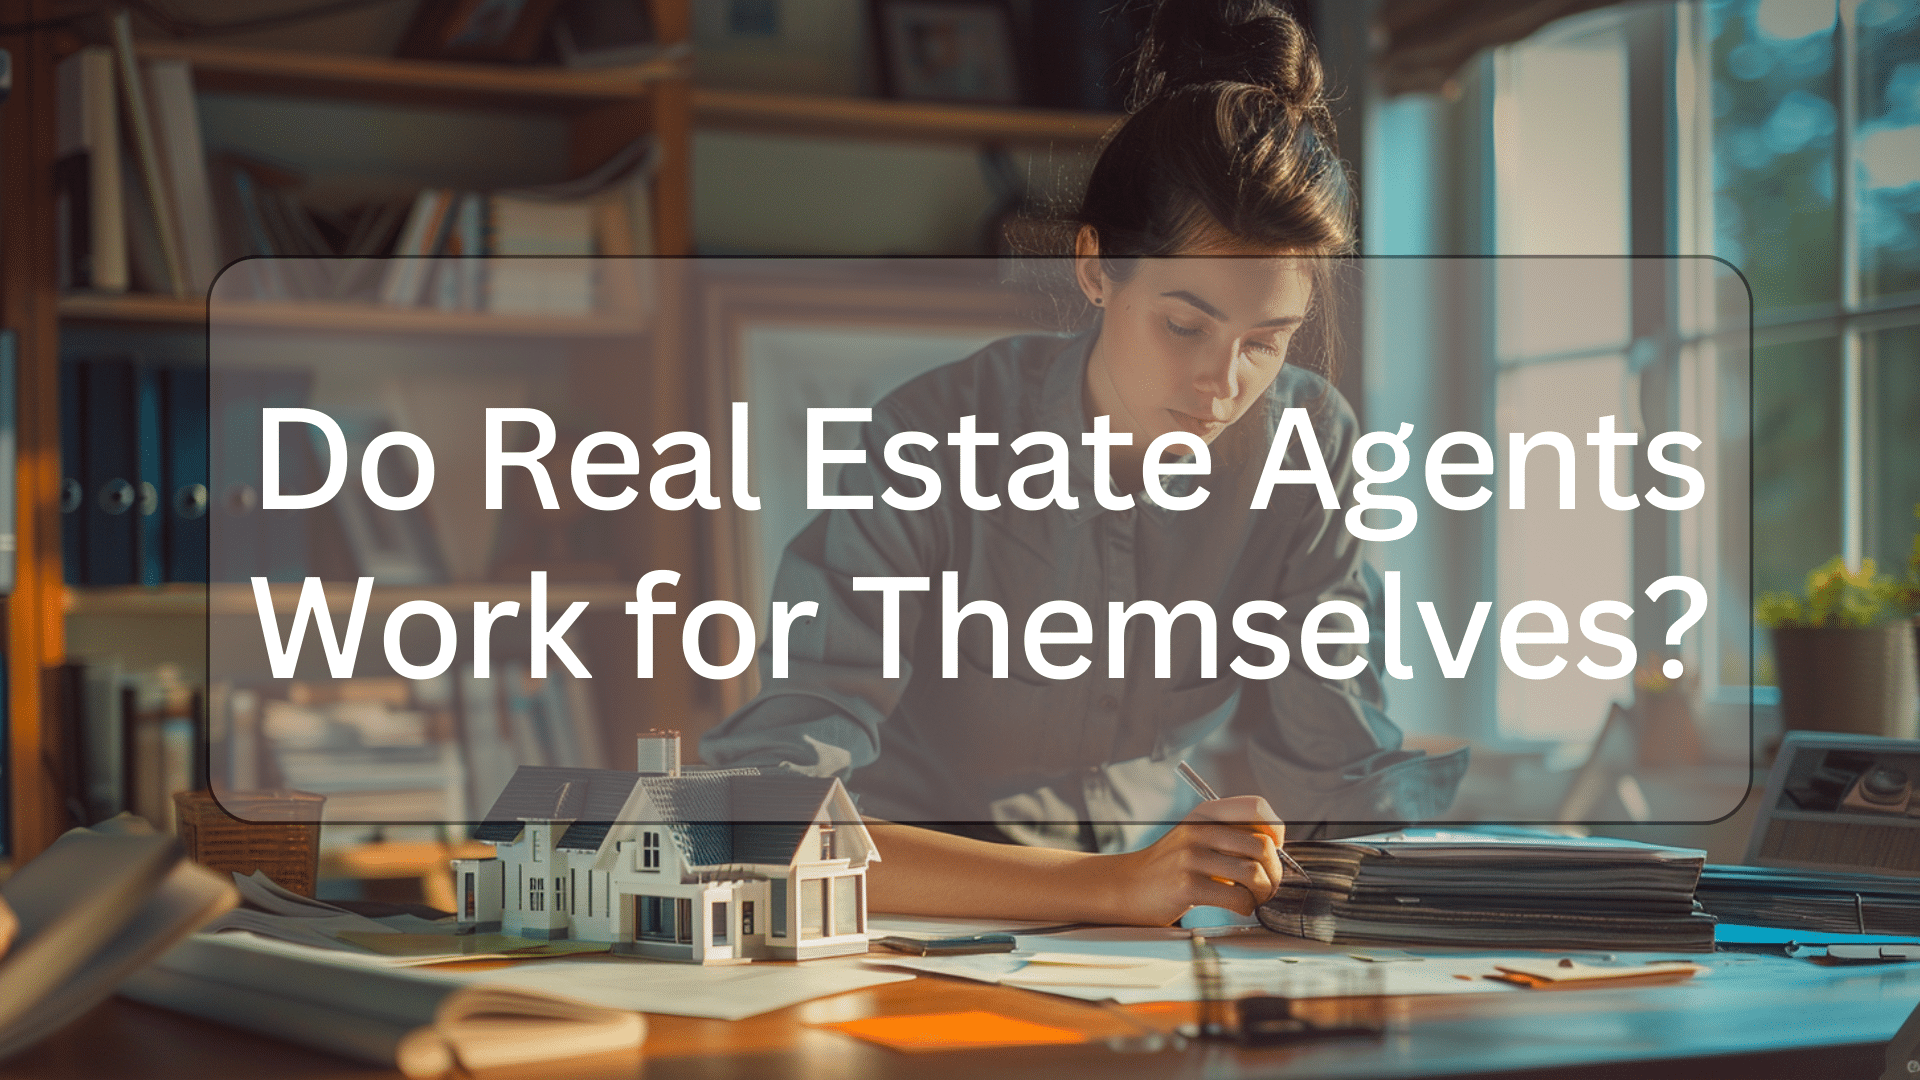 Do Real Estate Agents Work for Themselves illustration